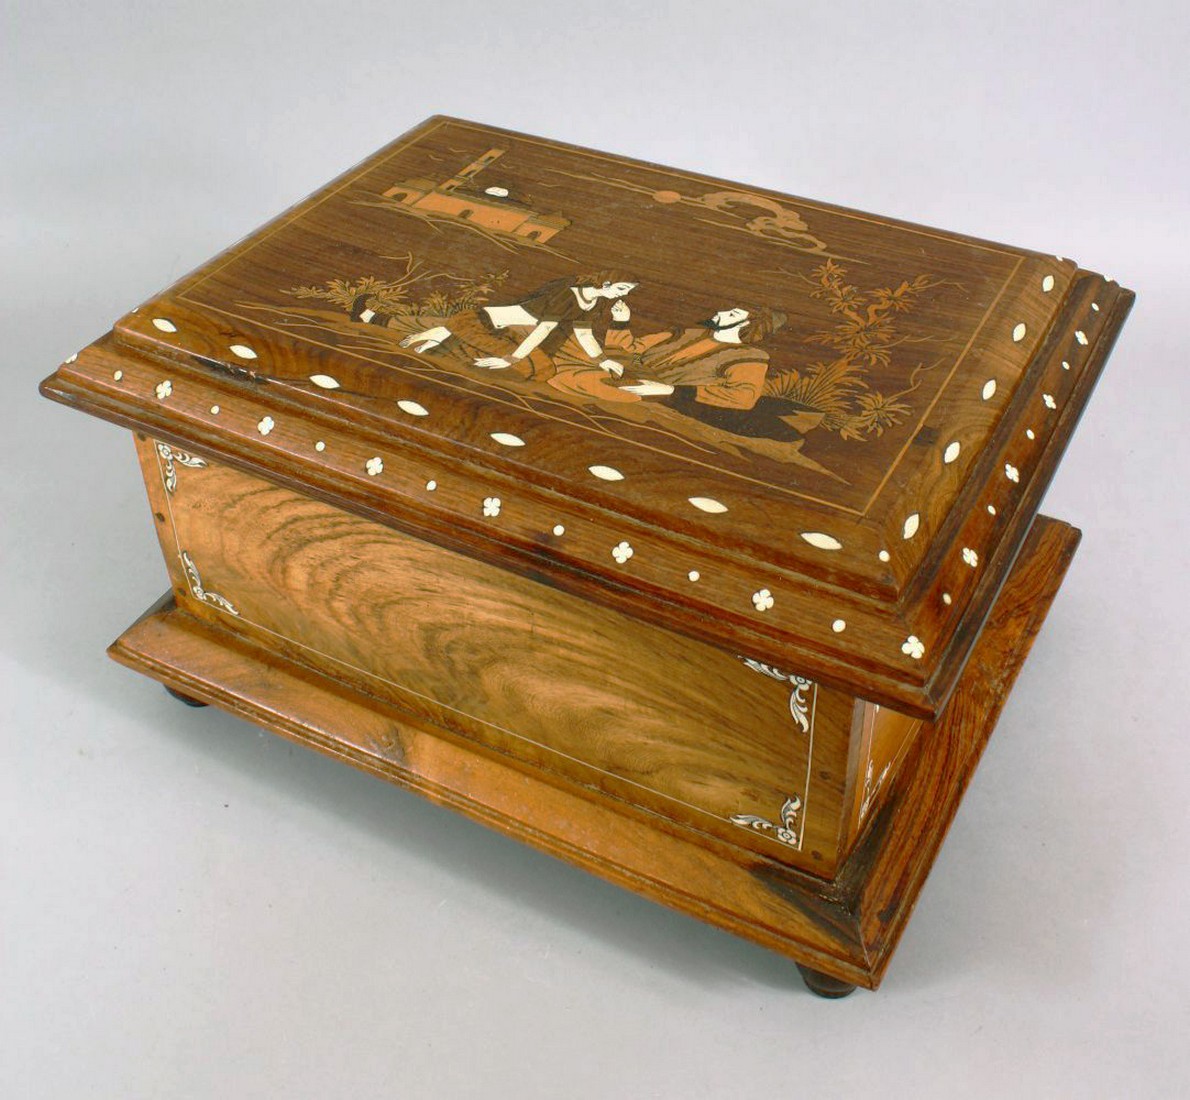 AN INDIAN BONE INLAID WOODEN BOX, inlaid with romantic figures in a landscape, with inlaid border